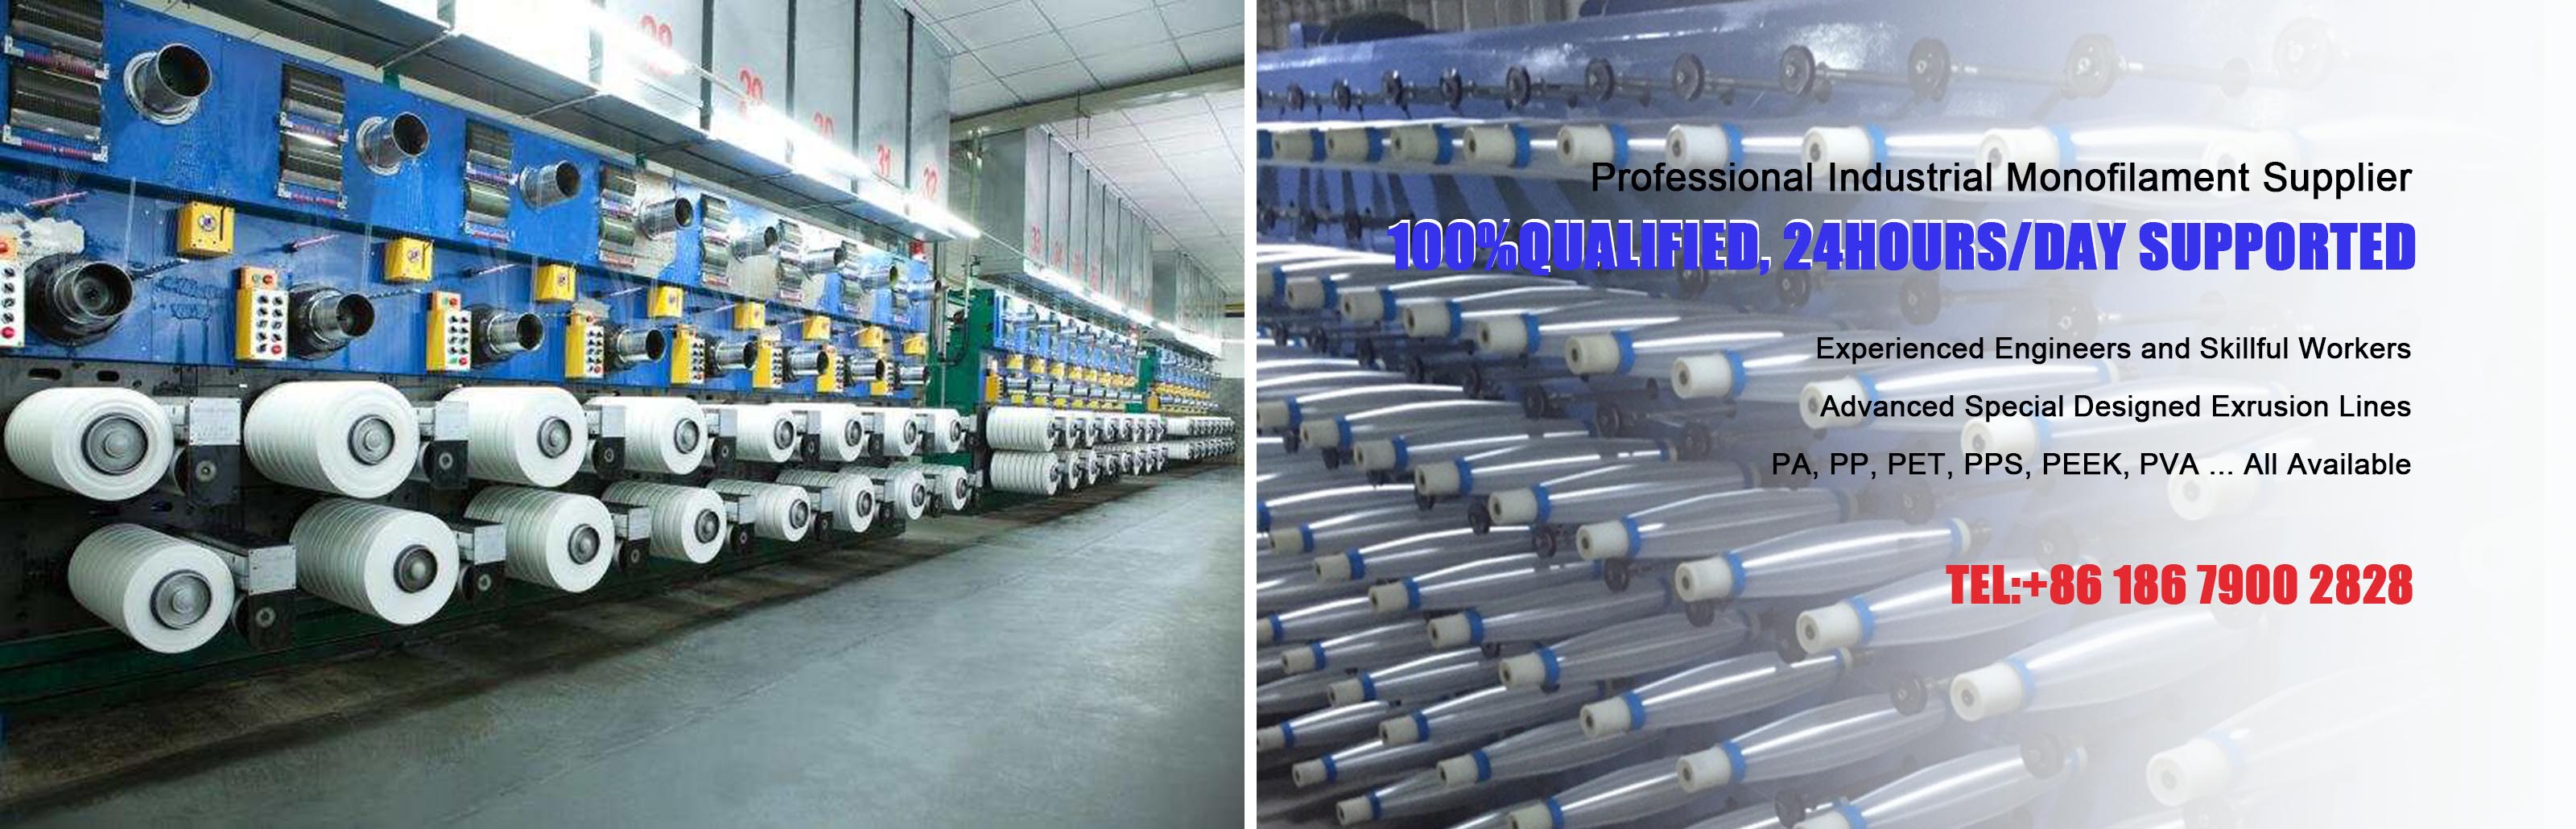 Monofilament, polyester monofilament, polypropylene monofilament, polyamide monofilament, PP monofilament, nylon monofilament, industrial monofilament, PA monofilament, PET monofilament, trimmer line, fishing line, pla-steel wire, green house line, supporting screen line, industrial monofilament, spacer knitting monofilament